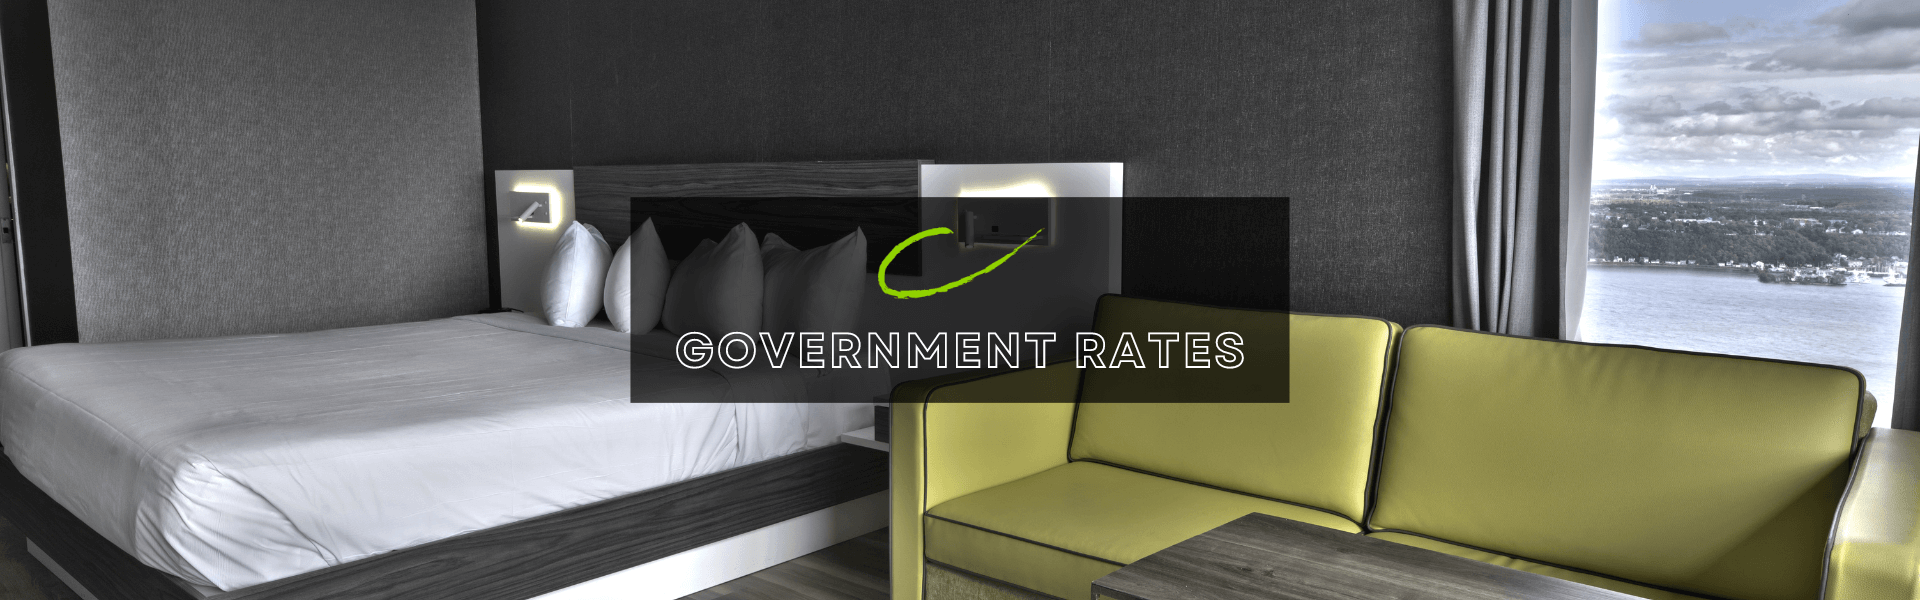 GOVERNMENT RATES